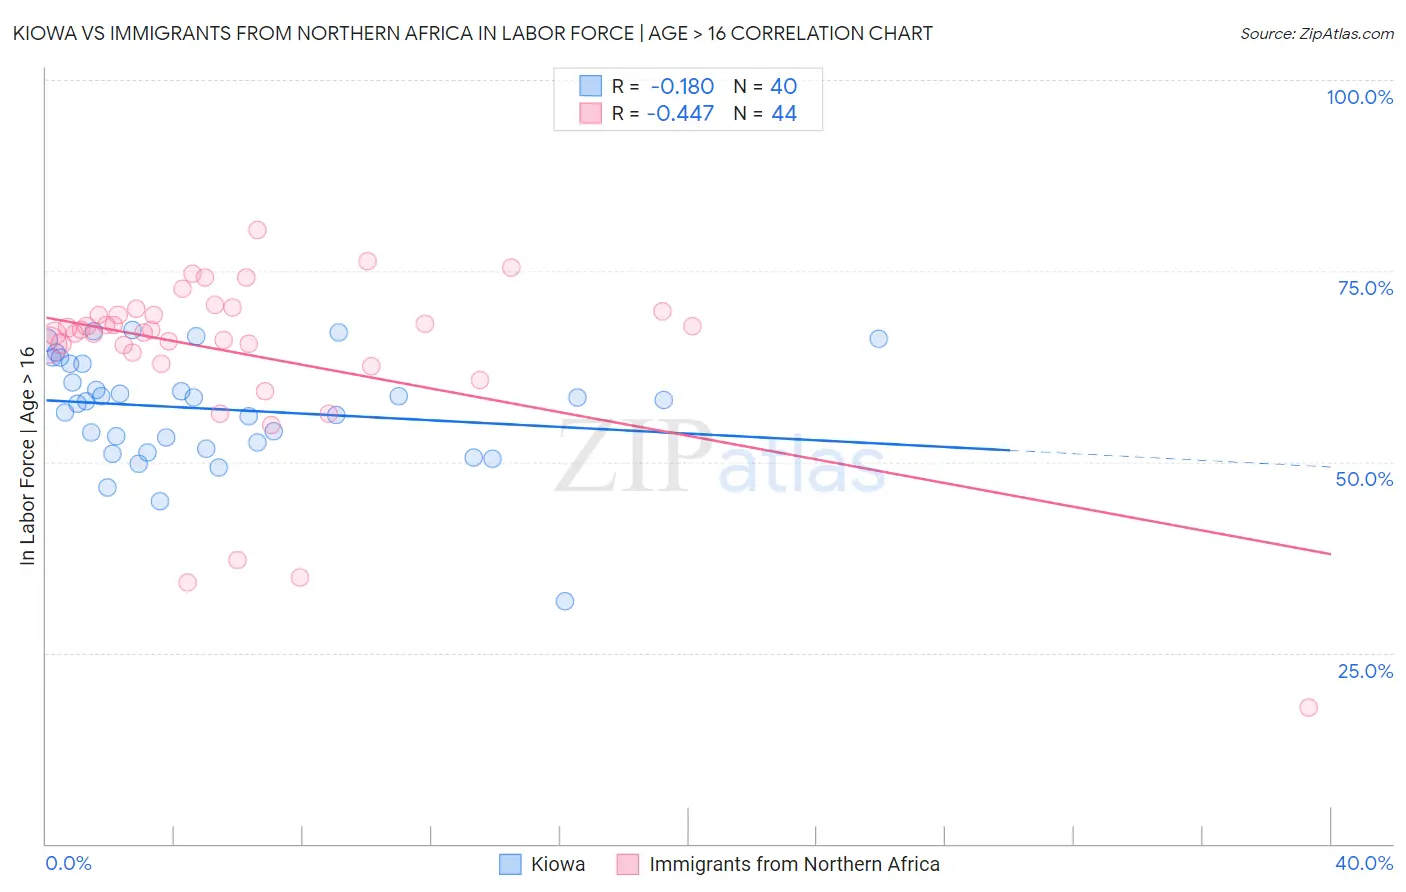 Kiowa vs Immigrants from Northern Africa In Labor Force | Age > 16